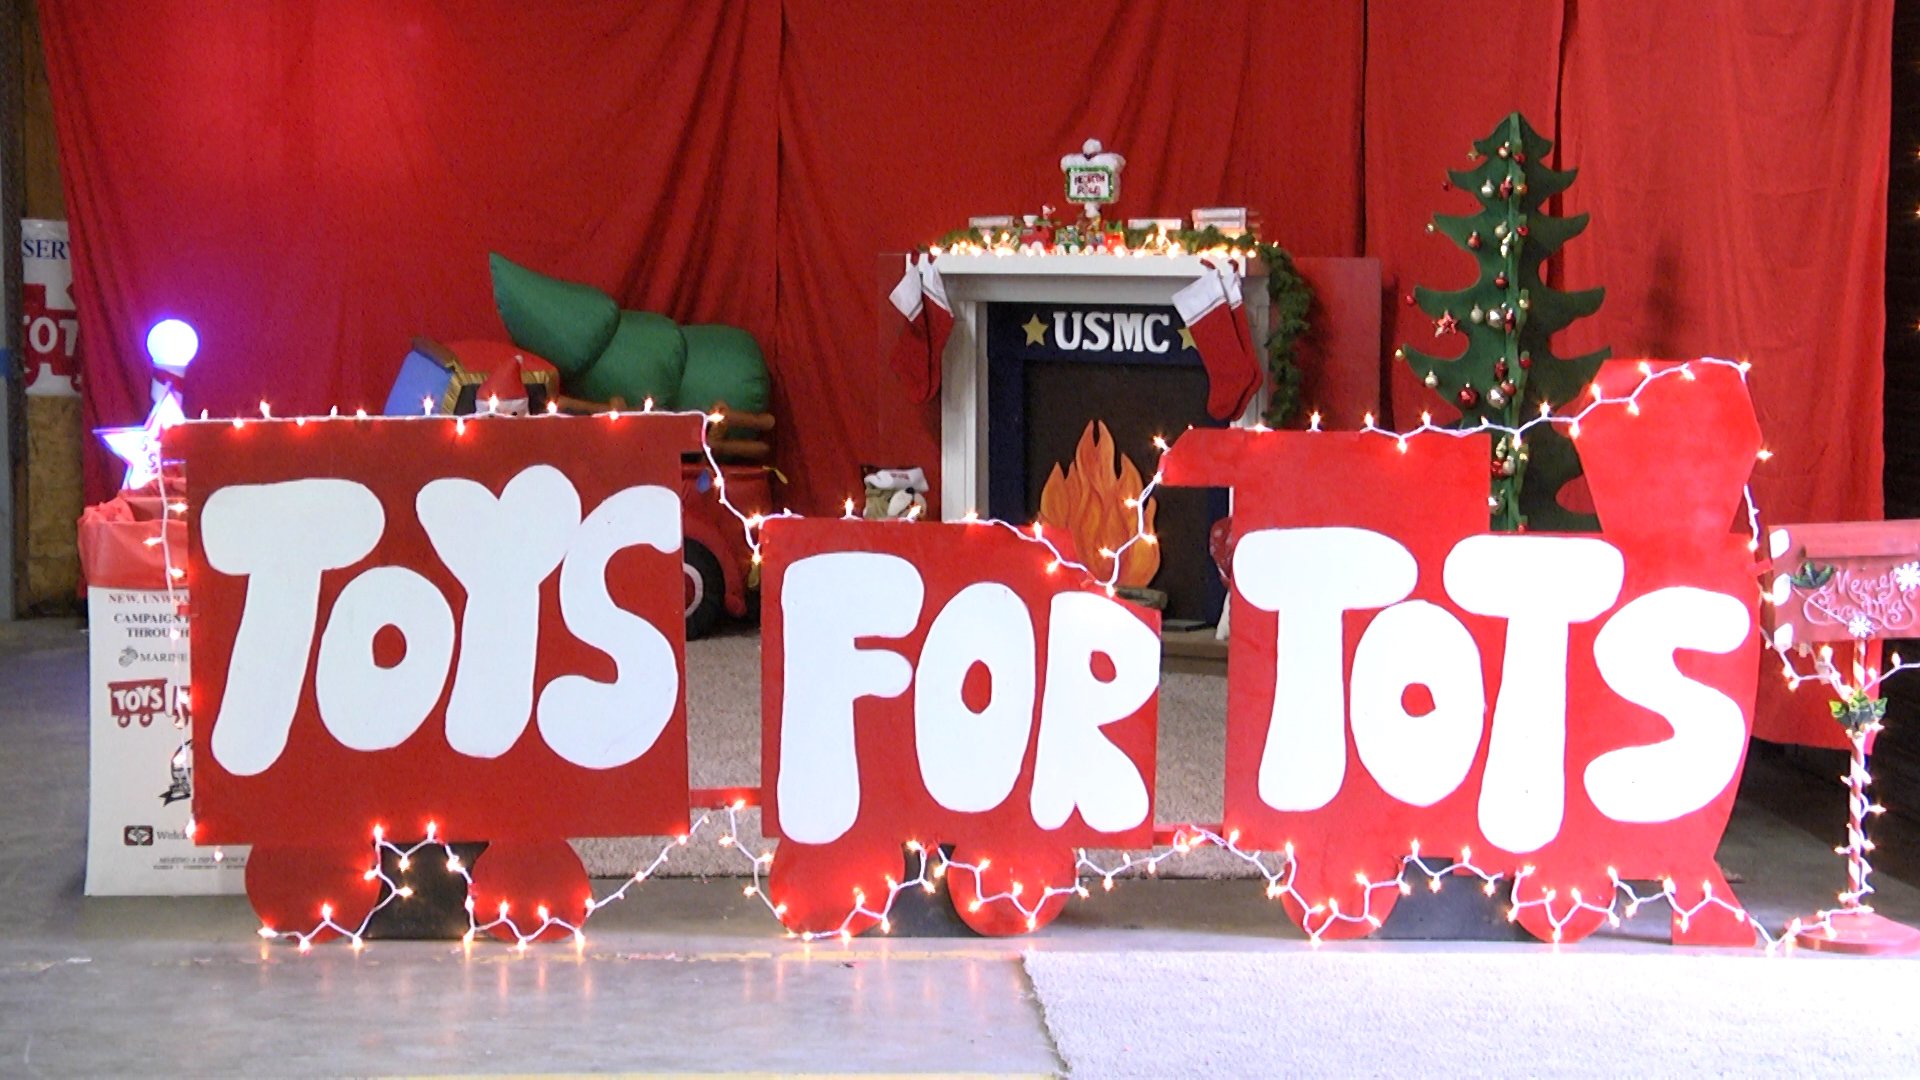 Last chance to request Christmas assistance Toys for Tots phone line